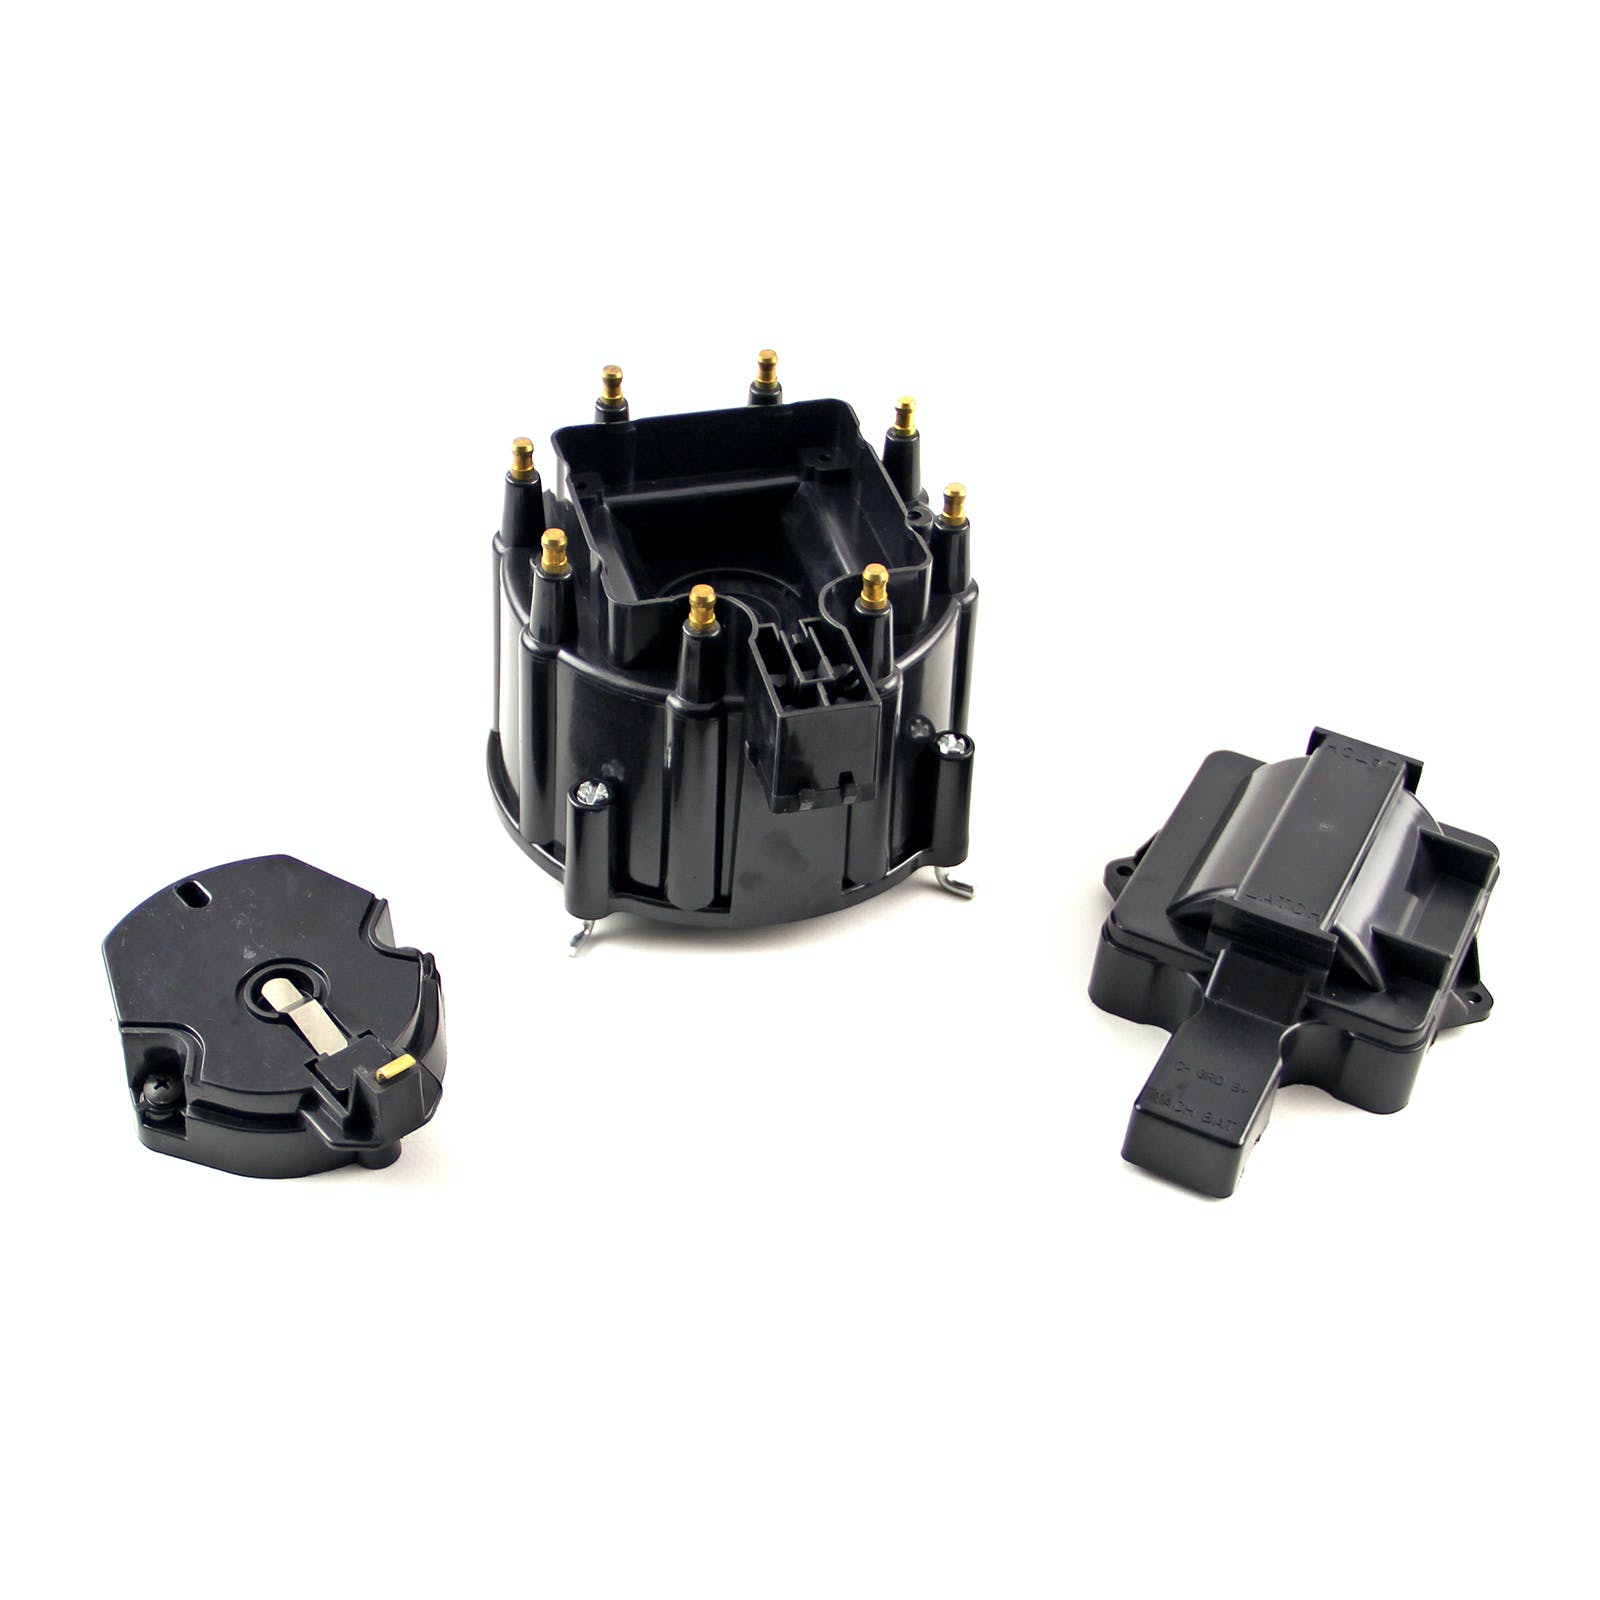 Speedmaster PCE370.1004 HEI Distributor Cap and Coil Cover - Black